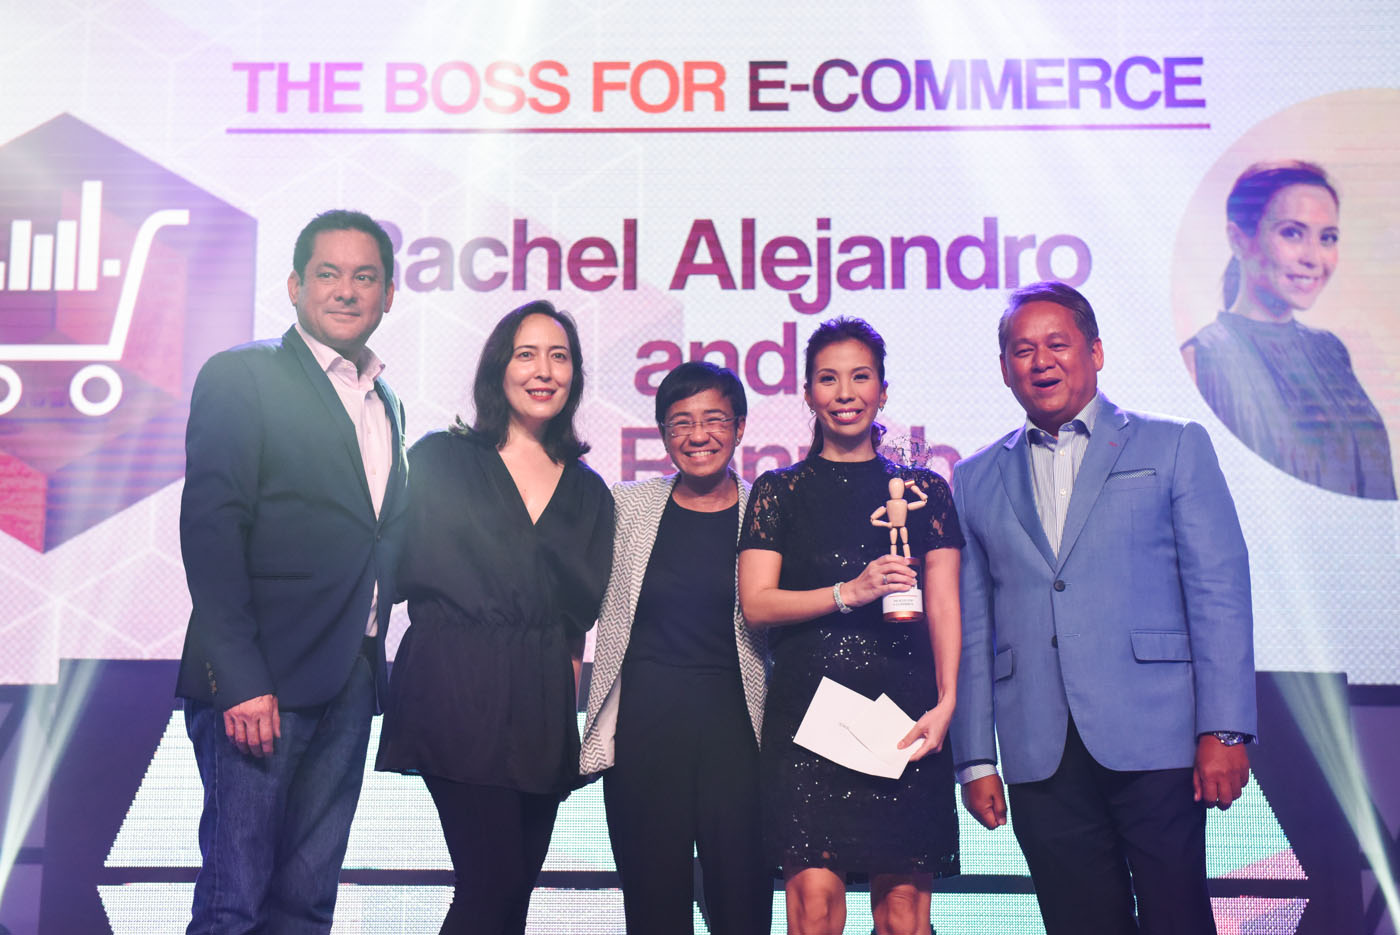 BOSS FOR E-COMMERCE. Barni Rennebeck (with trophy) flanked by some of the #BeTheBoss judges: (L to R) Mitch Locsin, Vice President and Head of PLDT SME Nation, Laura Verallo de Bertotto, CEO of VMV Hypoallergenics, Maria Ressa, CEO and Executive Editor or Rappler.com, and Eric Alberto, Executive Vice President for PLDT  